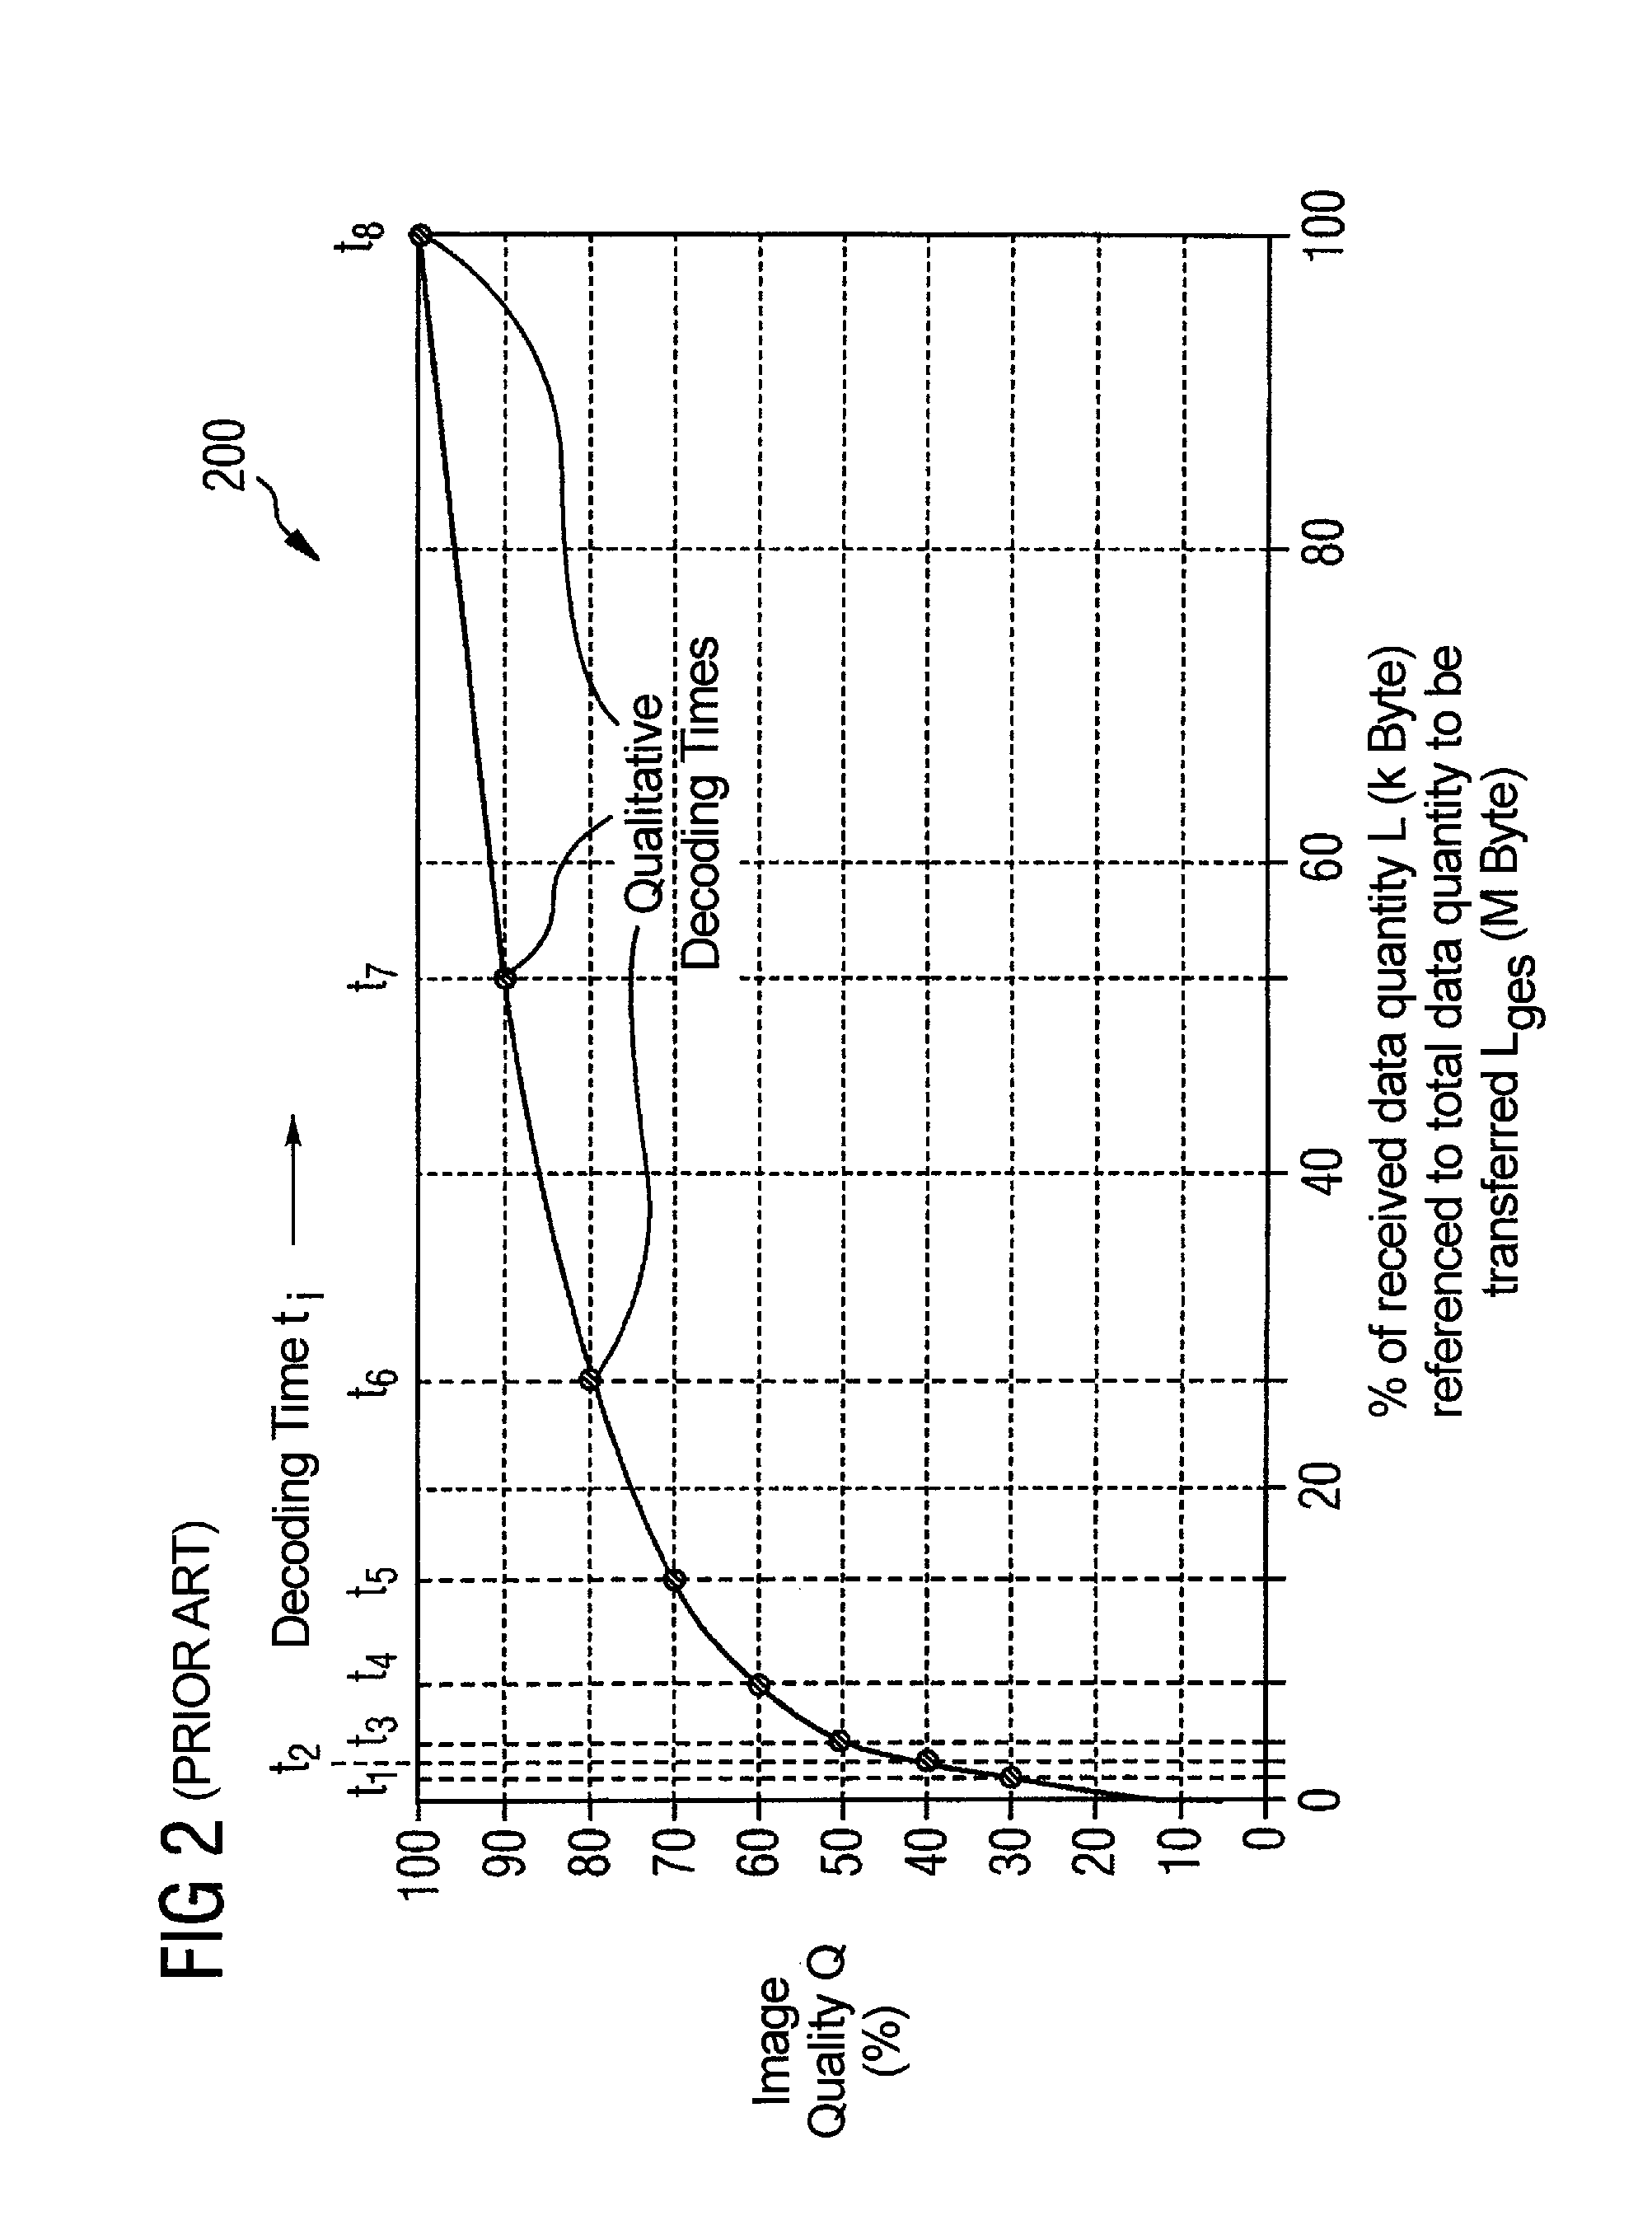 Process and functional unit for the optimization of displaying progressively coded image data